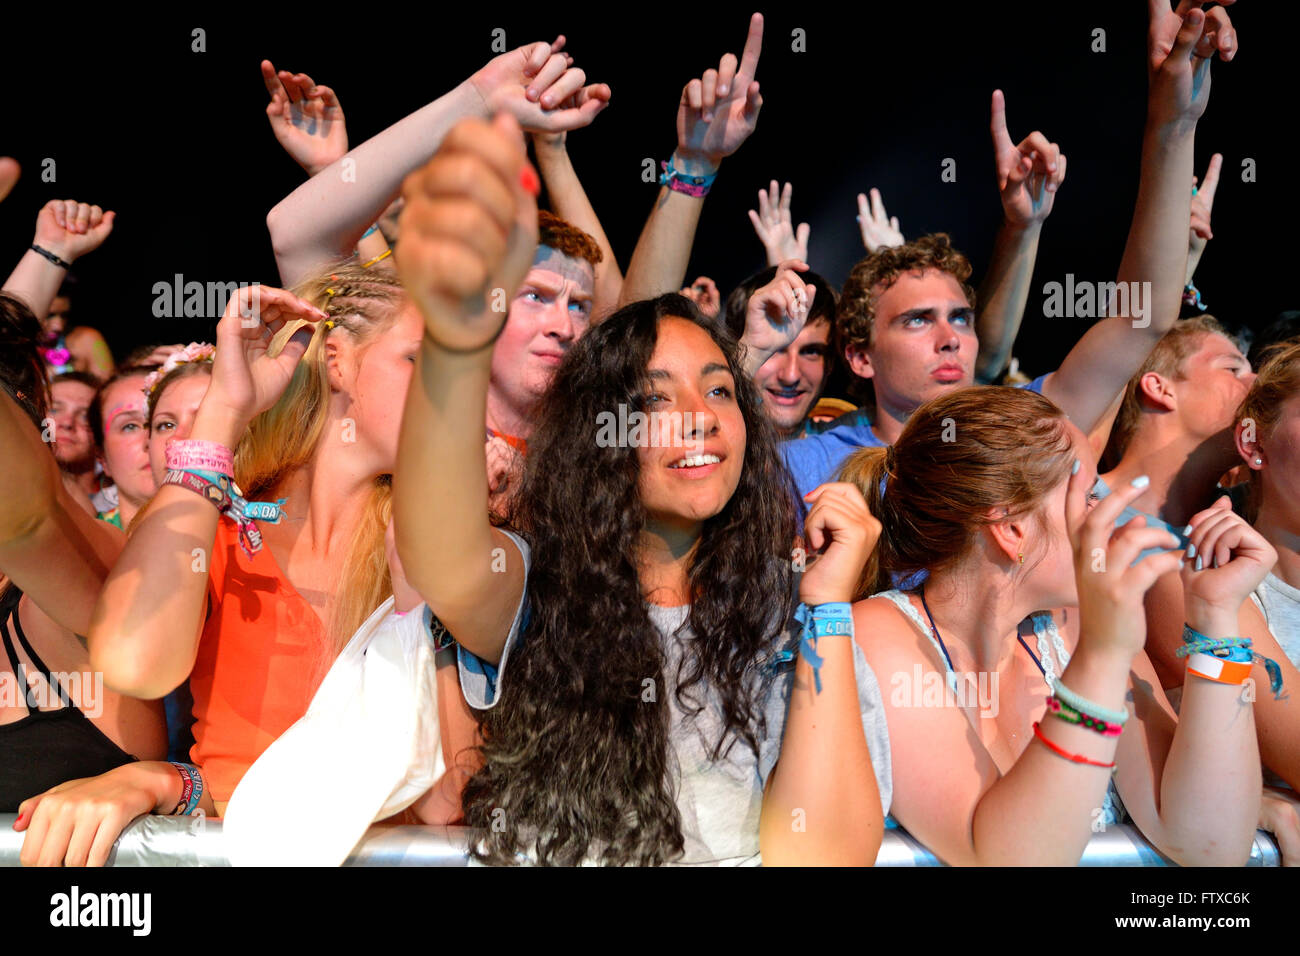 BENICASSIM, SPAIN - JULY 17: Crowd in a concert at FIB Festival on July 17, 2014 in Benicassim, Spain. Stock Photo